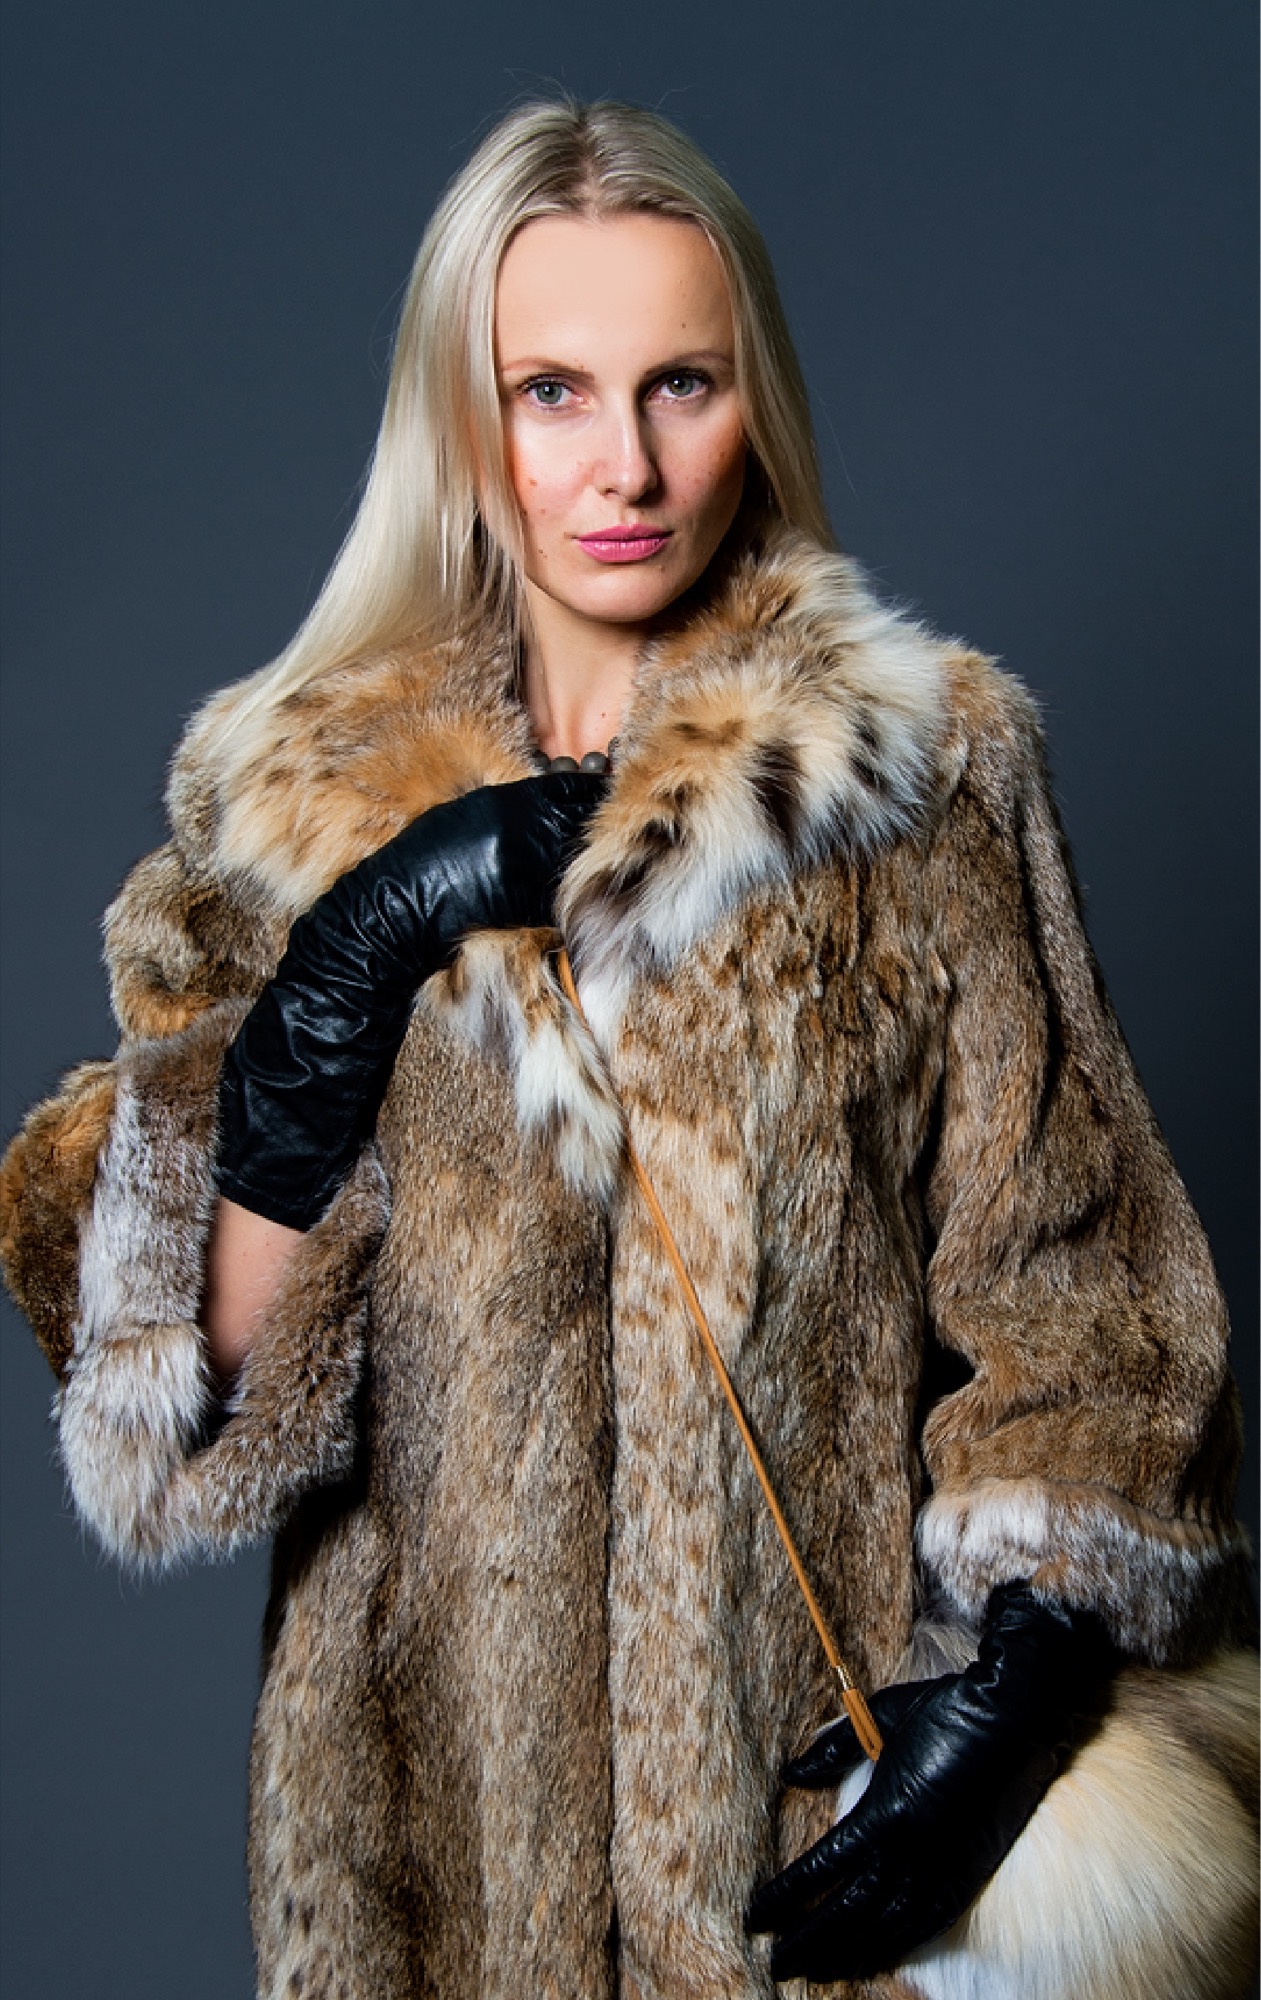 A blonde woman wearing leather gloves and furs